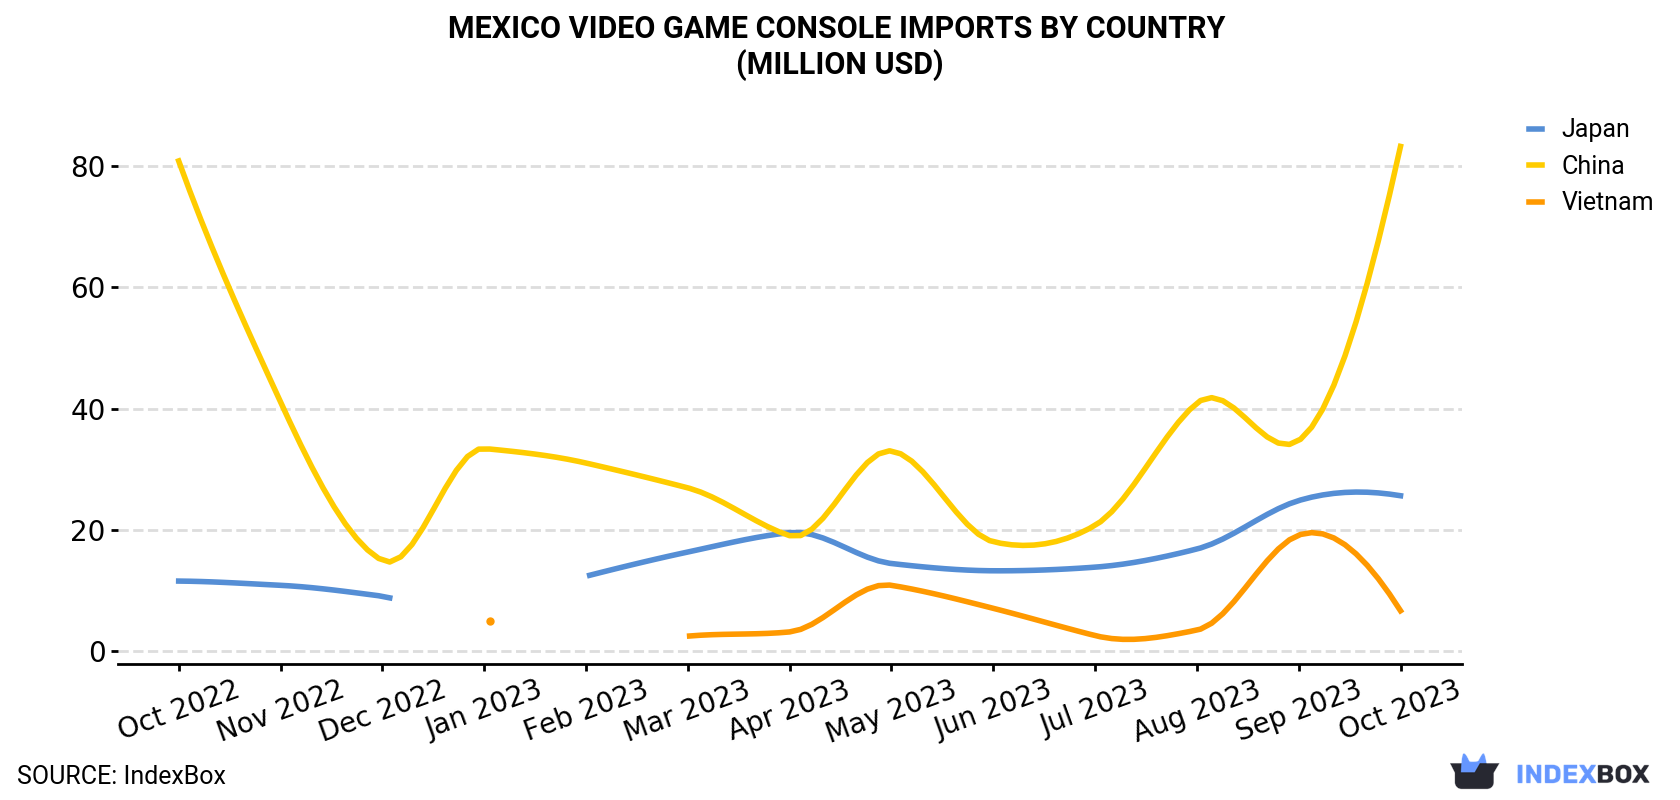 Mexico Video Game Console Imports By Country (Million USD)